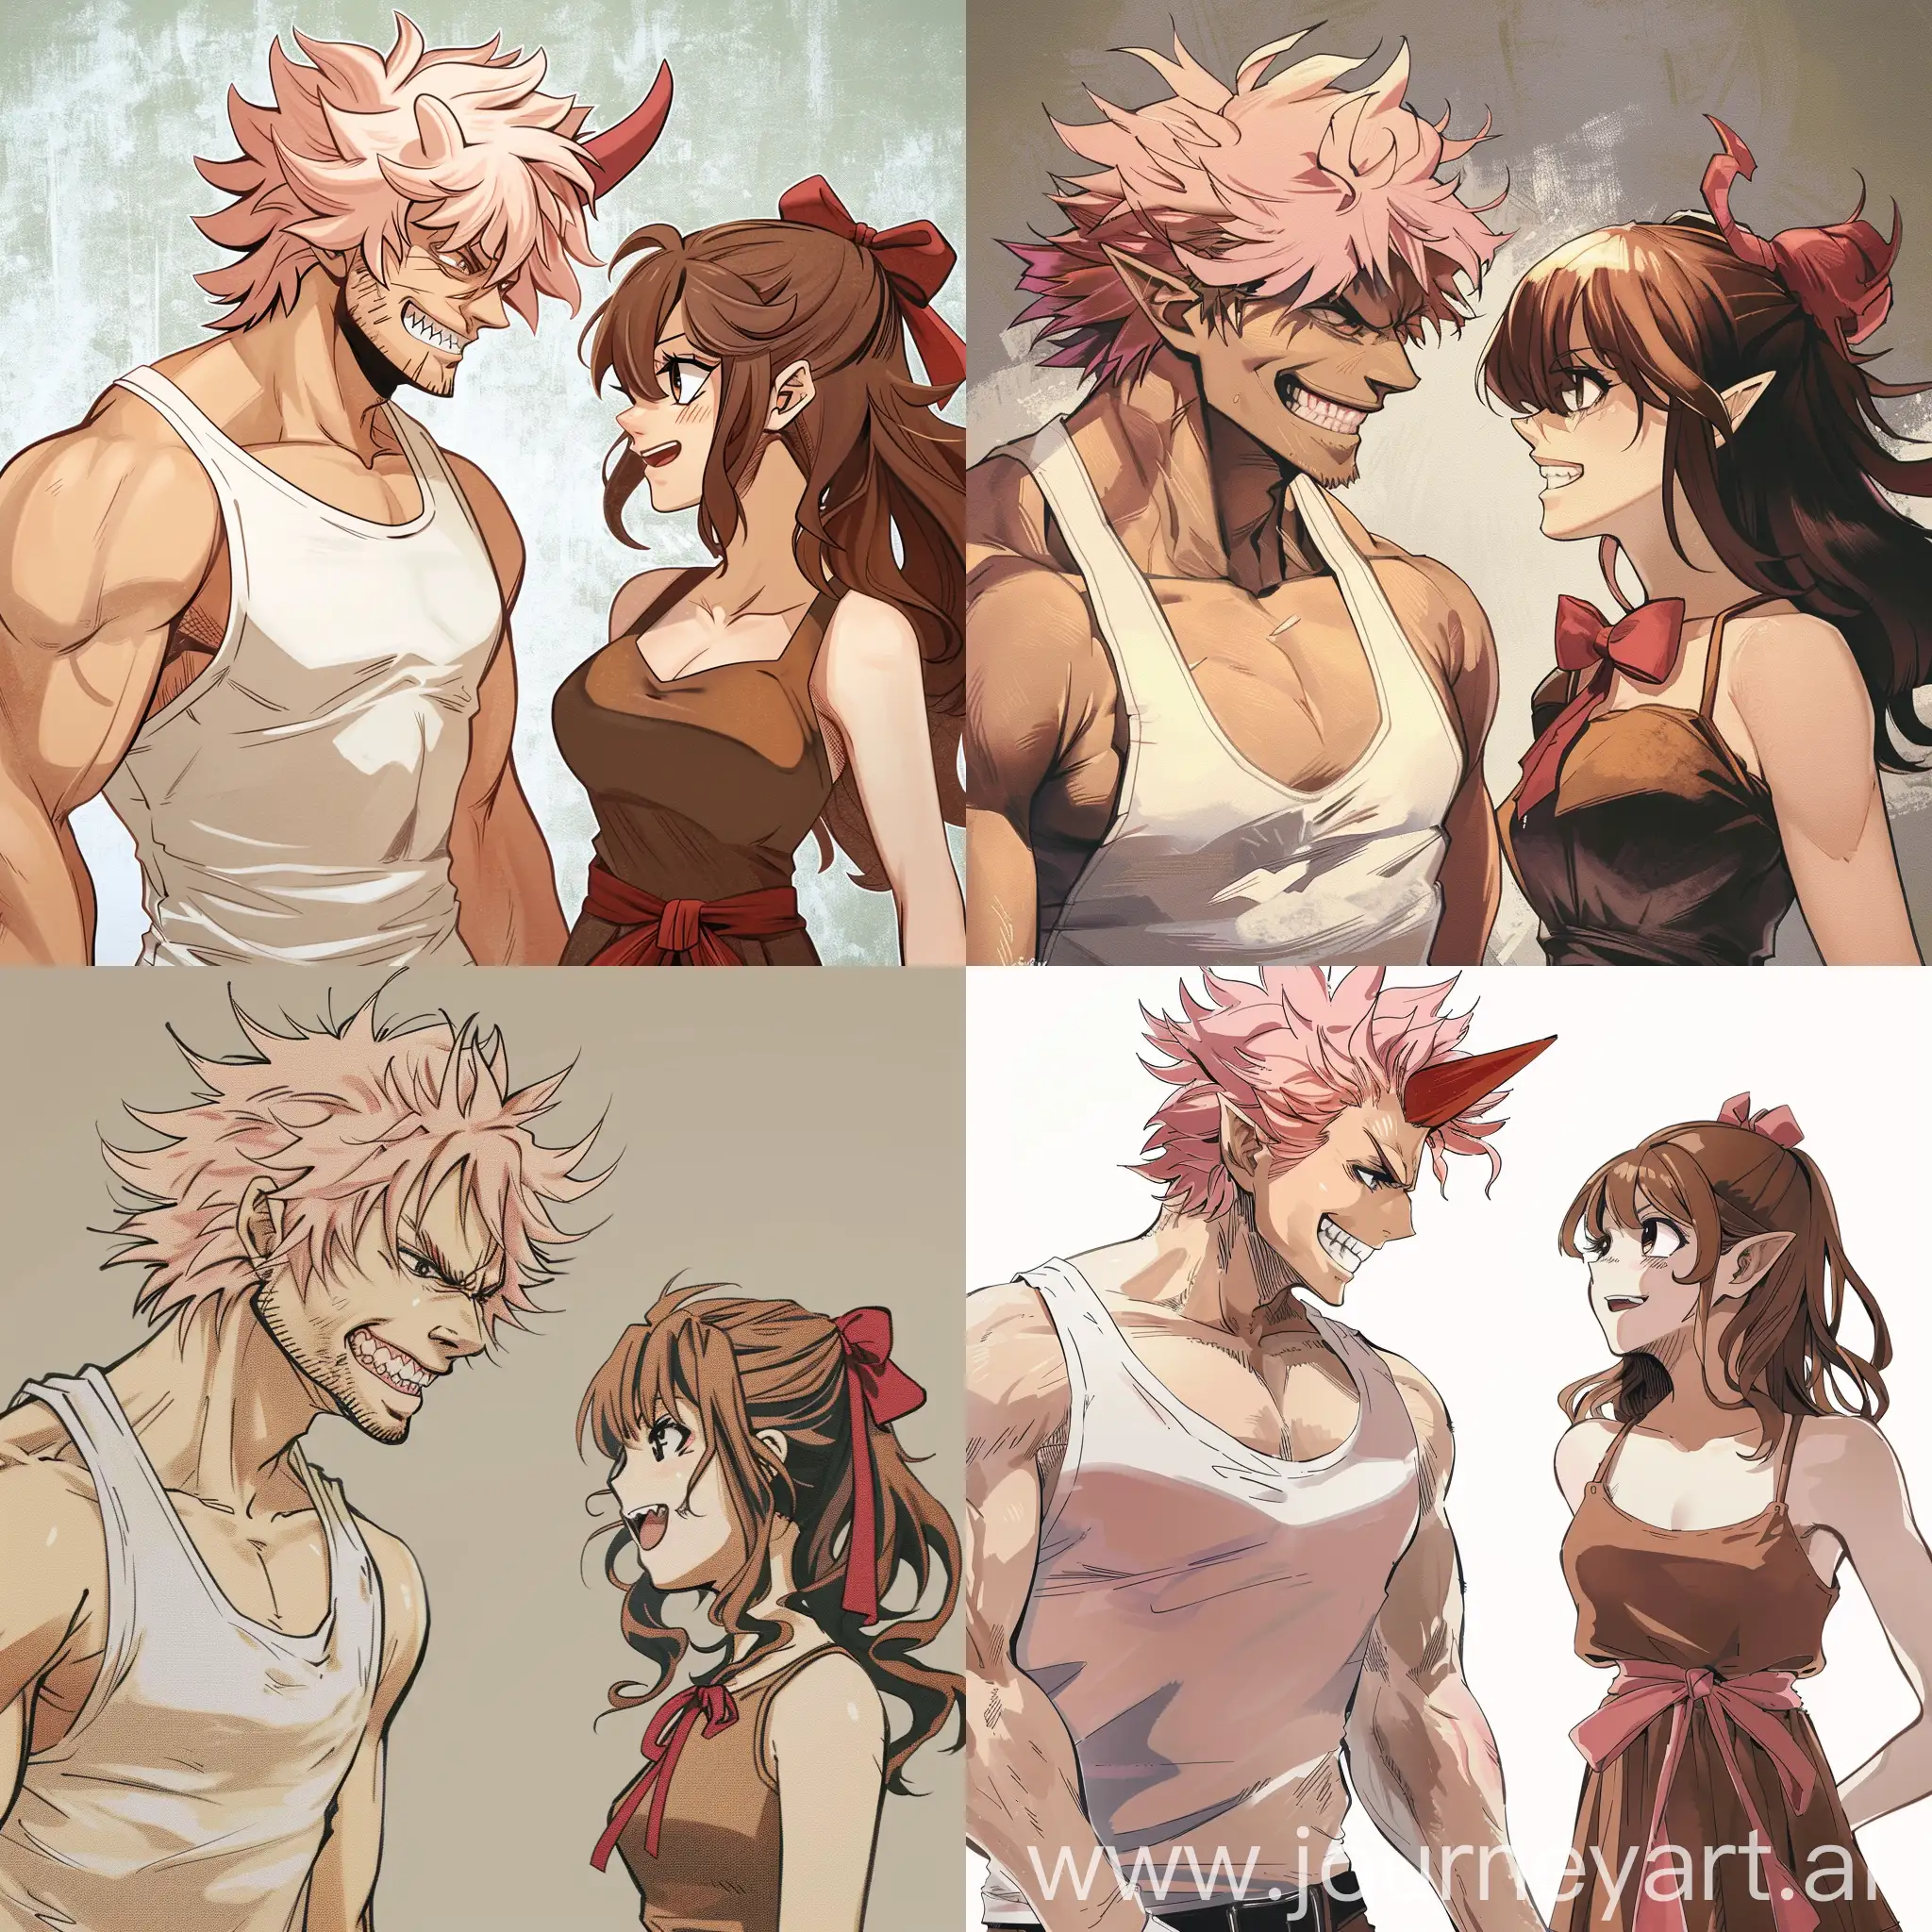 Manga style illustration in the vein of Ishida Sui, featuring a fit man with blond-pinkish fluffy hair, white tank top, sharp teeth, human, smirking while looking to a girl on his right. The girl has brown hair tied with a red ribbon, black eyes and is wearing a brown dress. (Man: 1.3, Sharp Teeth Smirk: 1.2, Red Horn: 1.1), (Girl: 1.3, Long Brown Hair and Ribbon: 1.2),